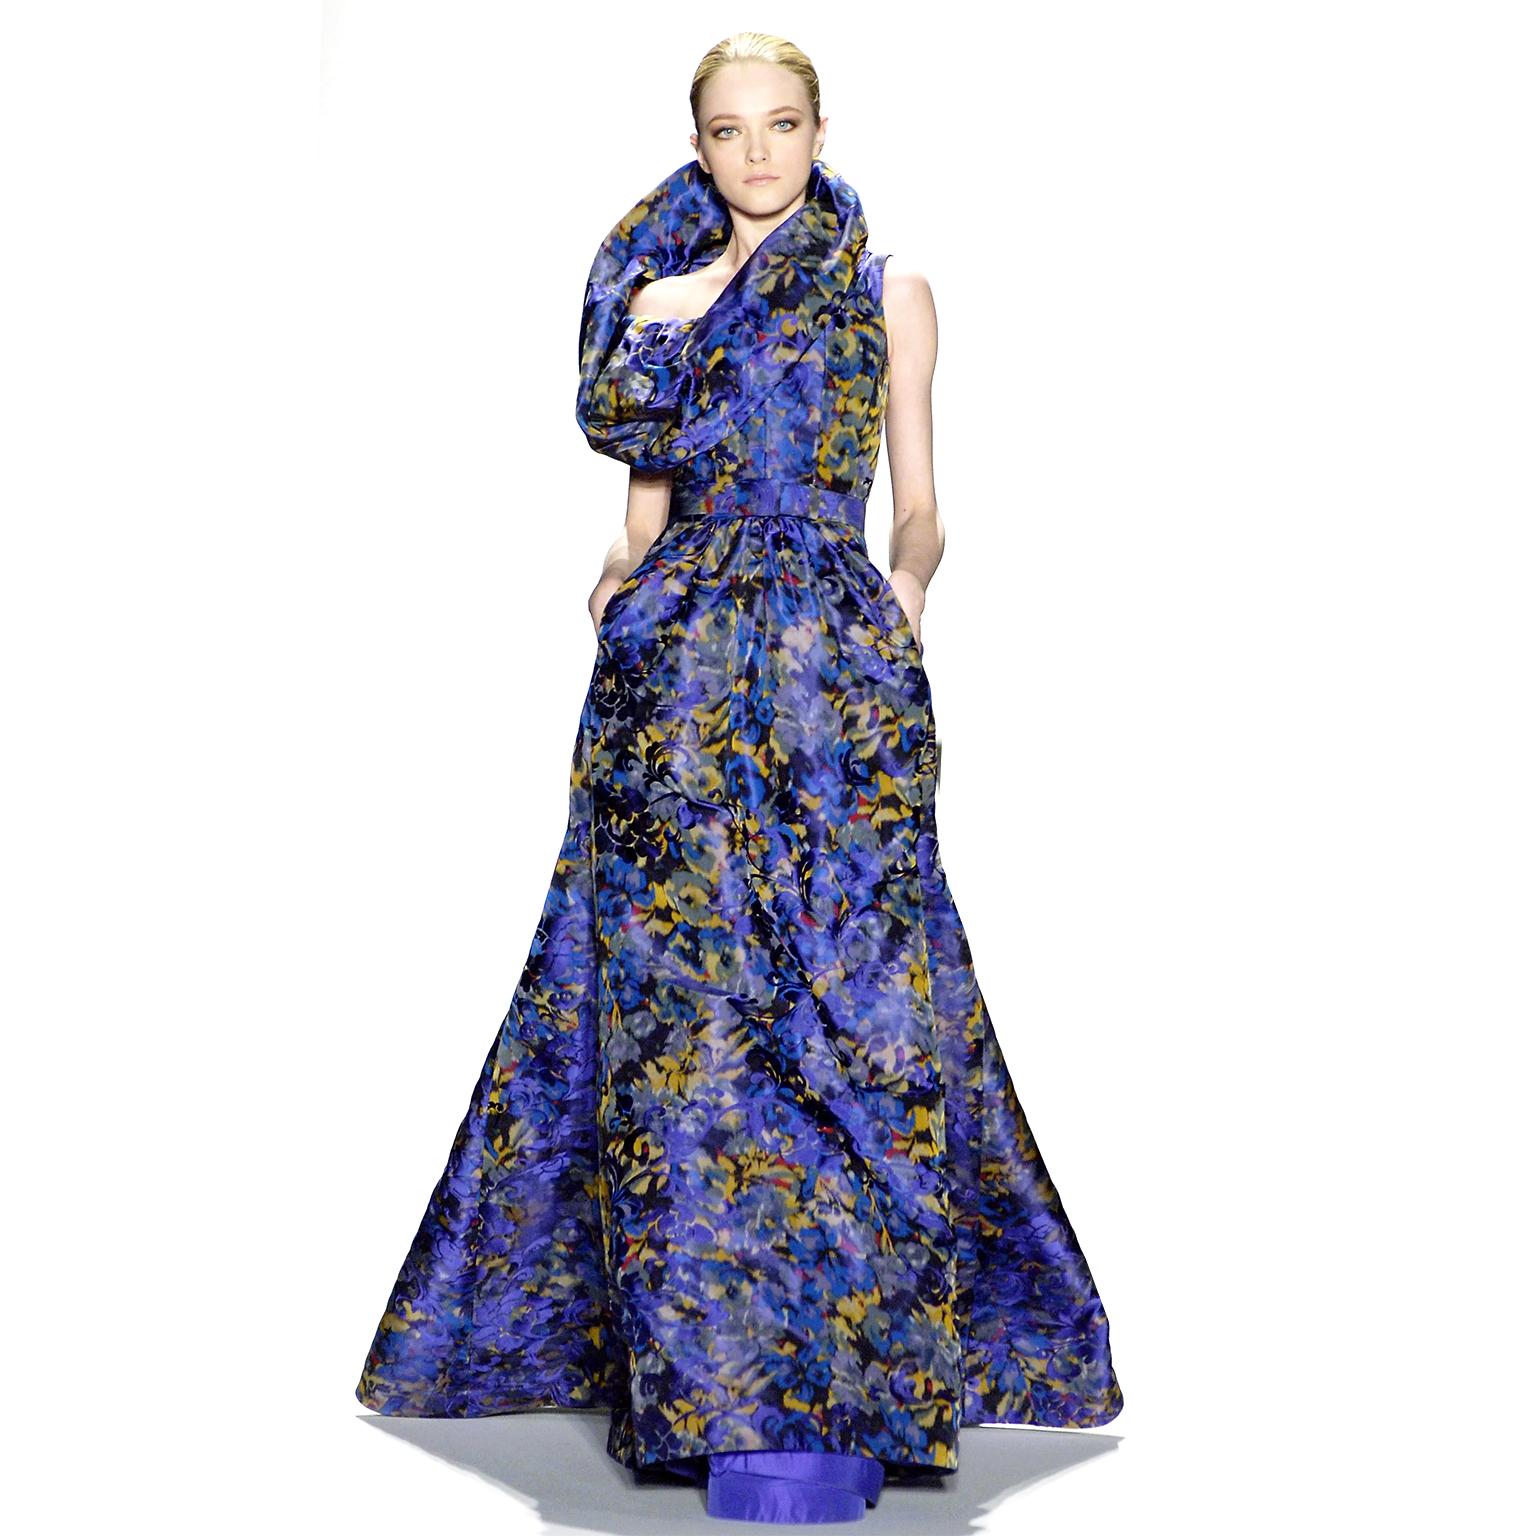 This purple floral Oscar de la Renta dress is incredibly unique and has a very flattering silhouette. We are showing it in a long version presented during the Fall Winter Oscar de la Renta runway show.The dress has a very structured and has a